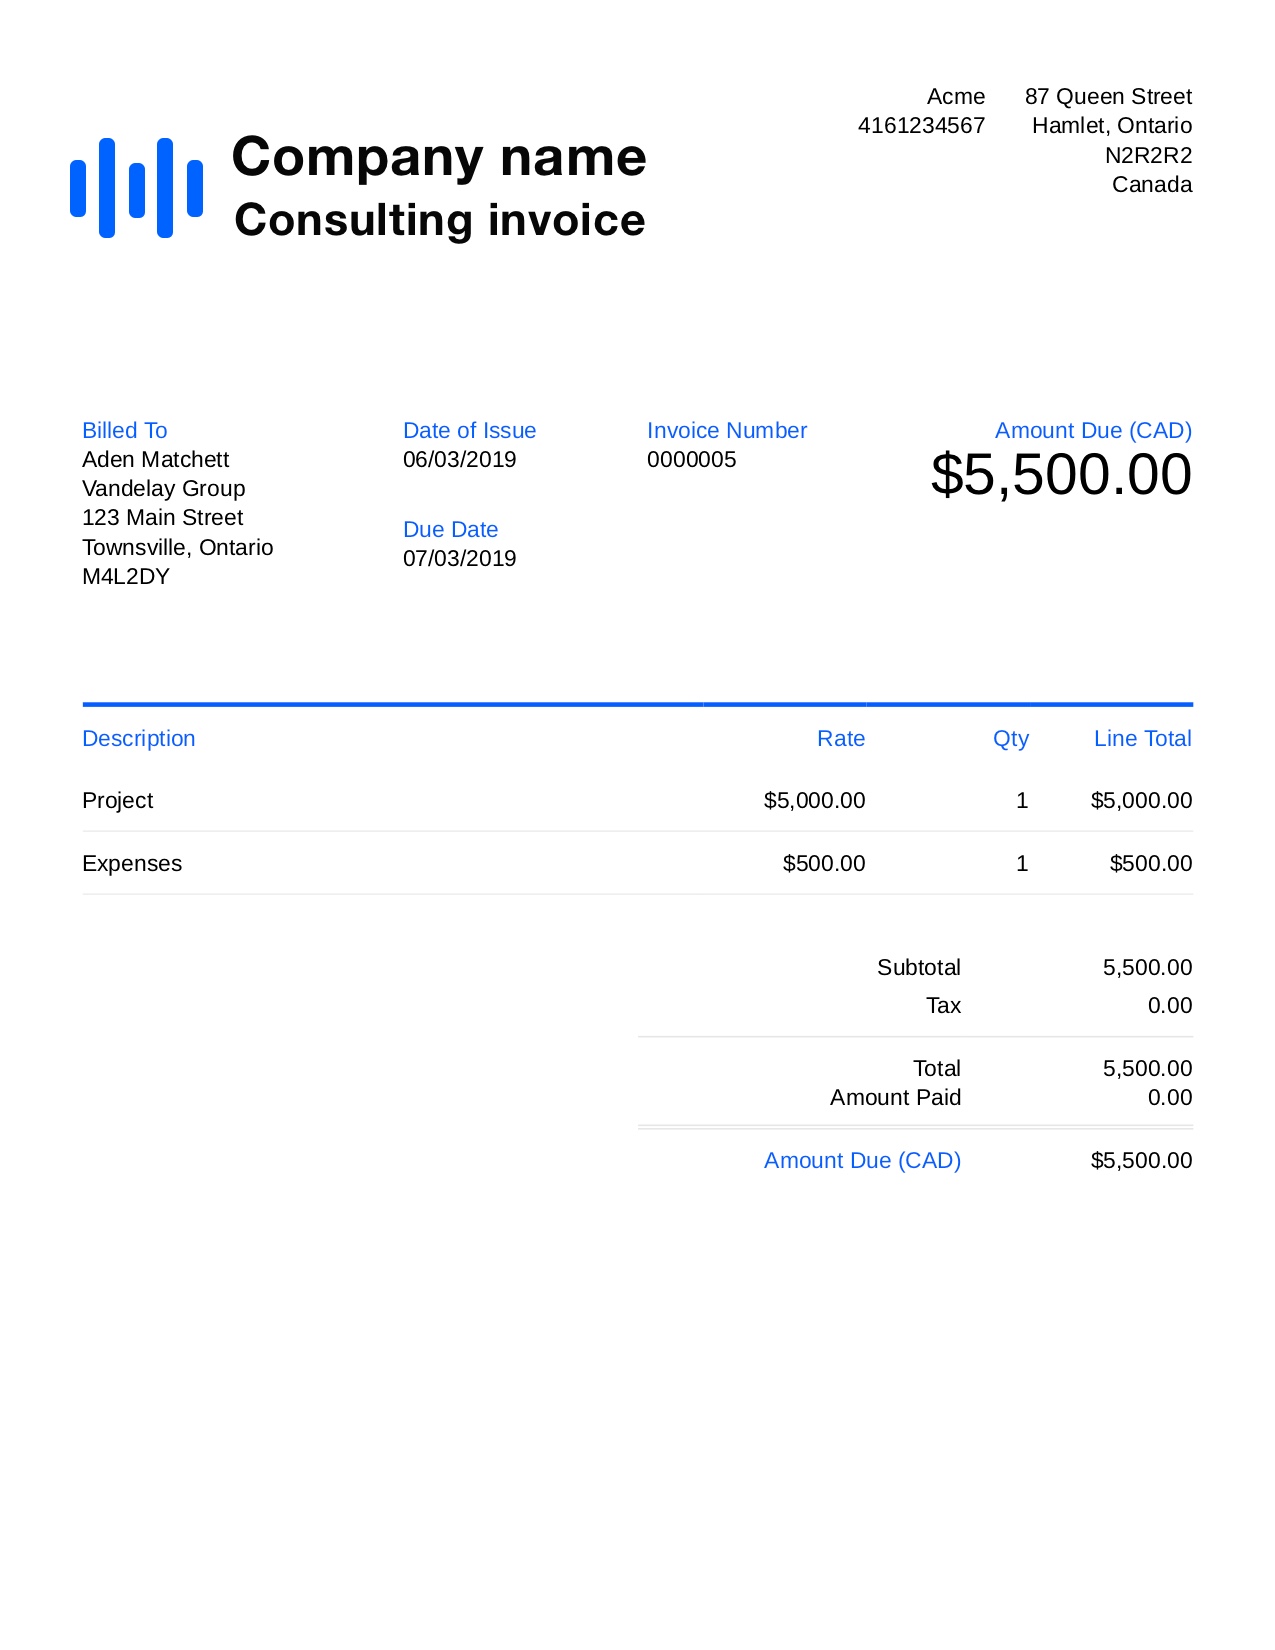 Free Consulting Invoice Template. Customize and Send in 90 Seconds